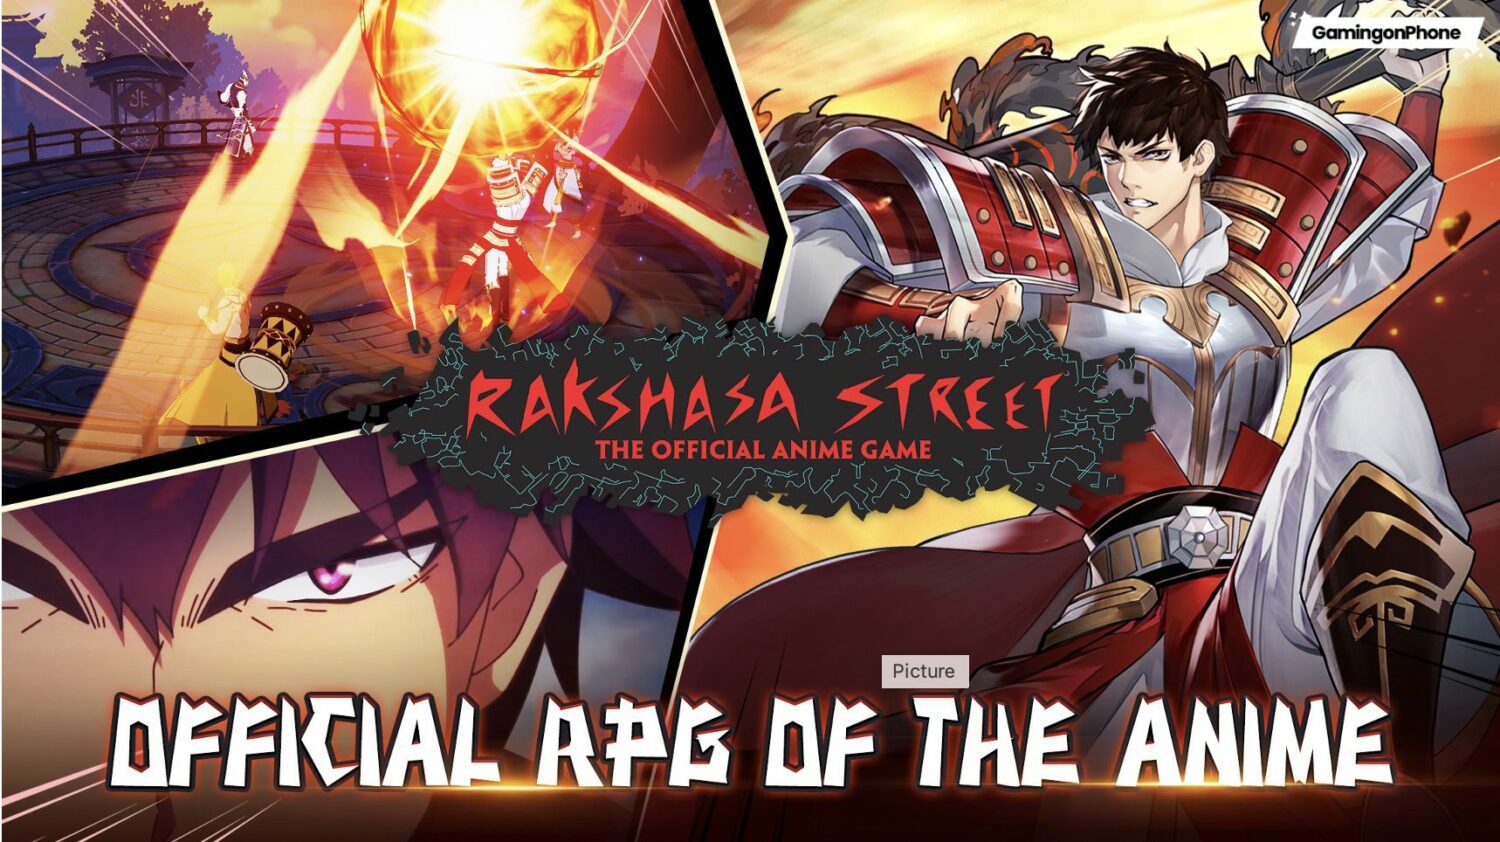 Rakshasa Street RPG based on the Chinese anime IP is now available  globally on early access